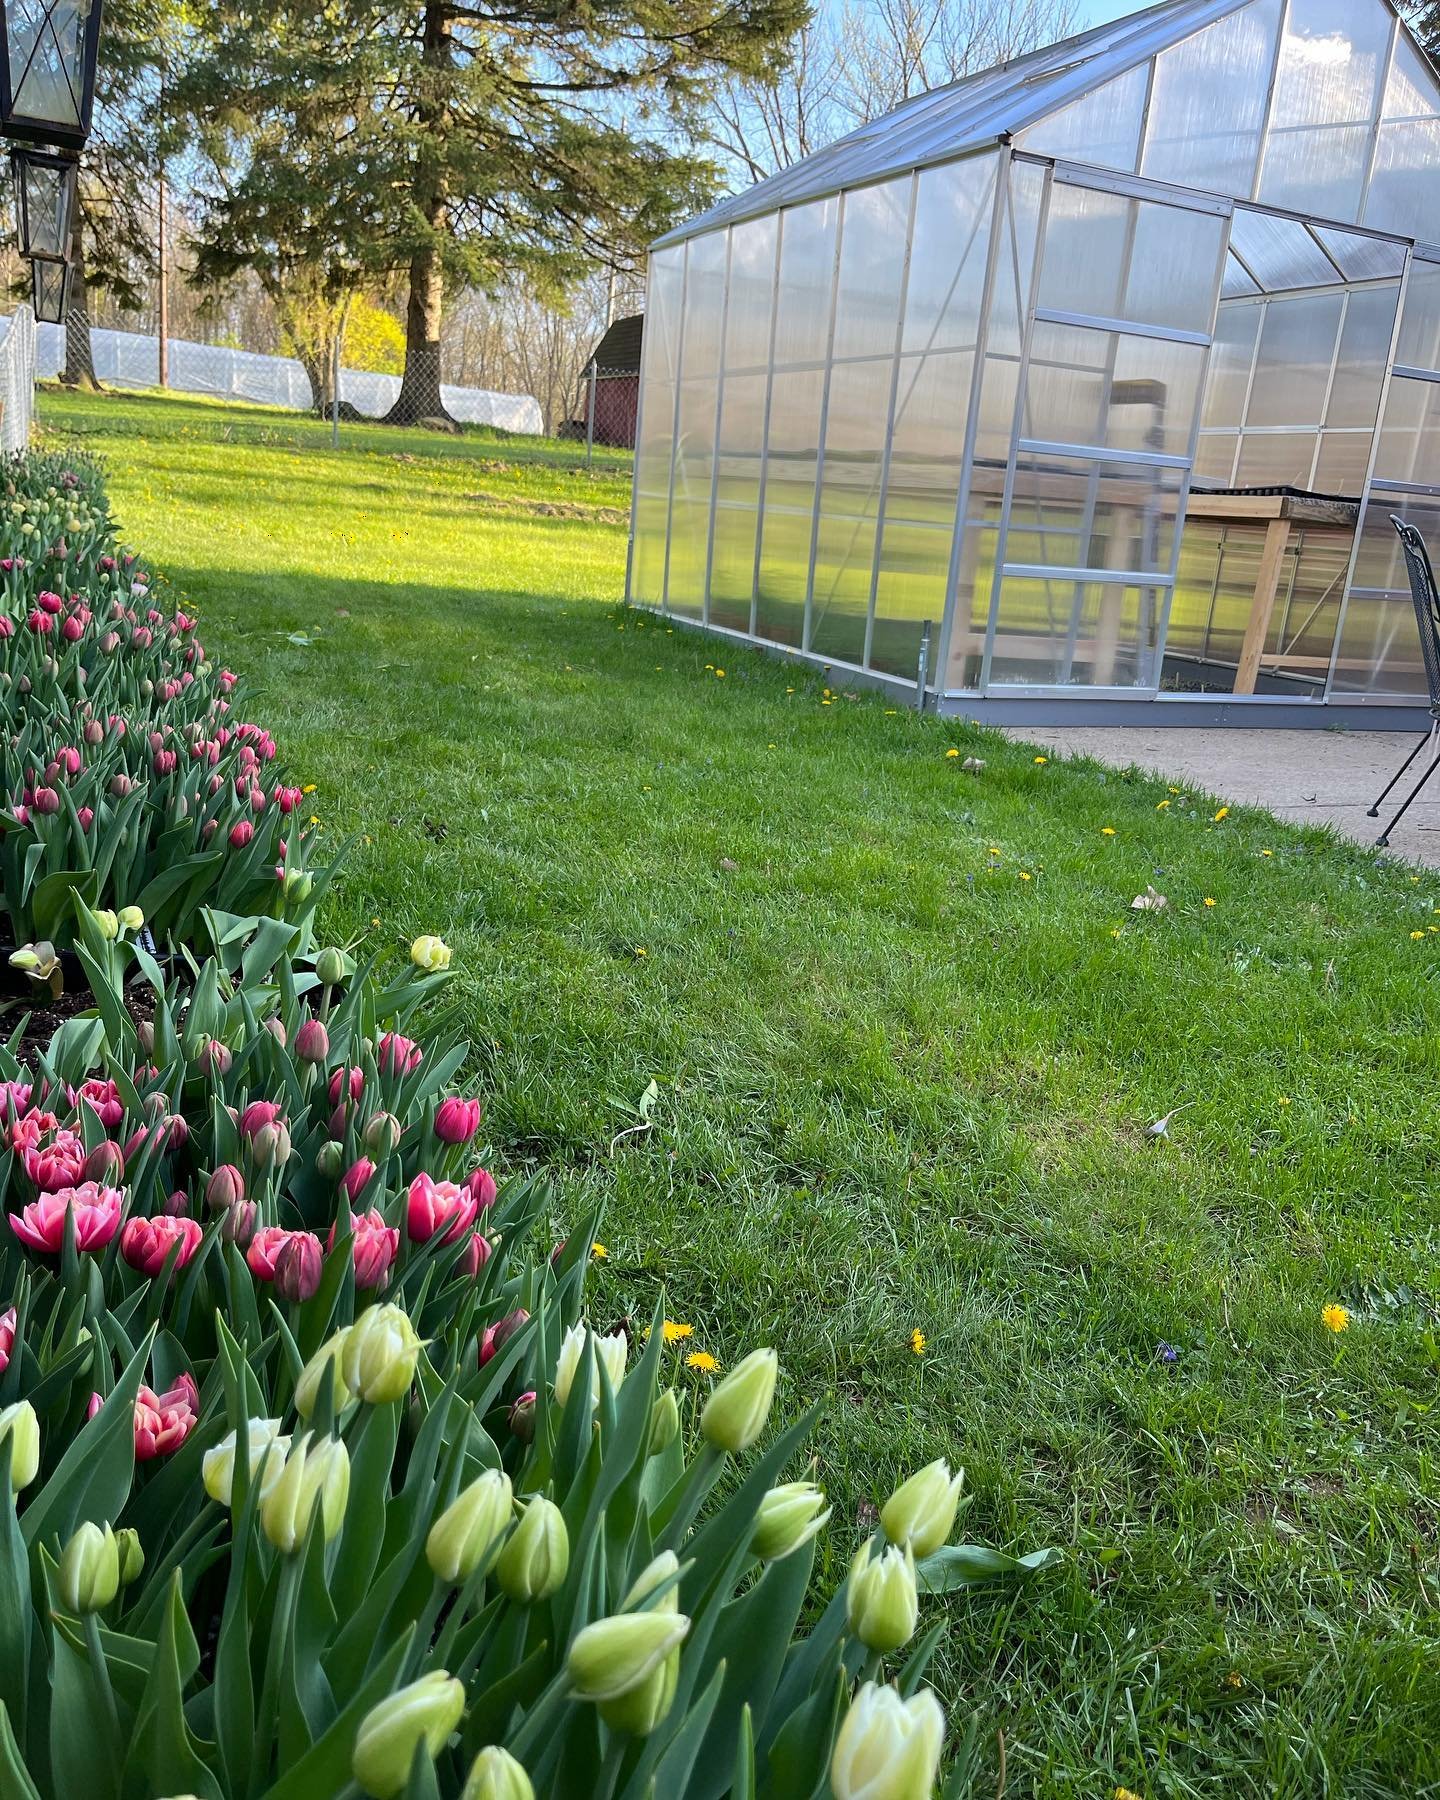 Tulips, tulips, and more tulips 🌷🌷🌷 We will have lots of them plus ranunculus at our self-serve Flower Cart this weekend, can't wait to share our flowers again  with you all! We will stock the cart at 9am tomorrow, 4/20 💐 Located at 3064 Woodland